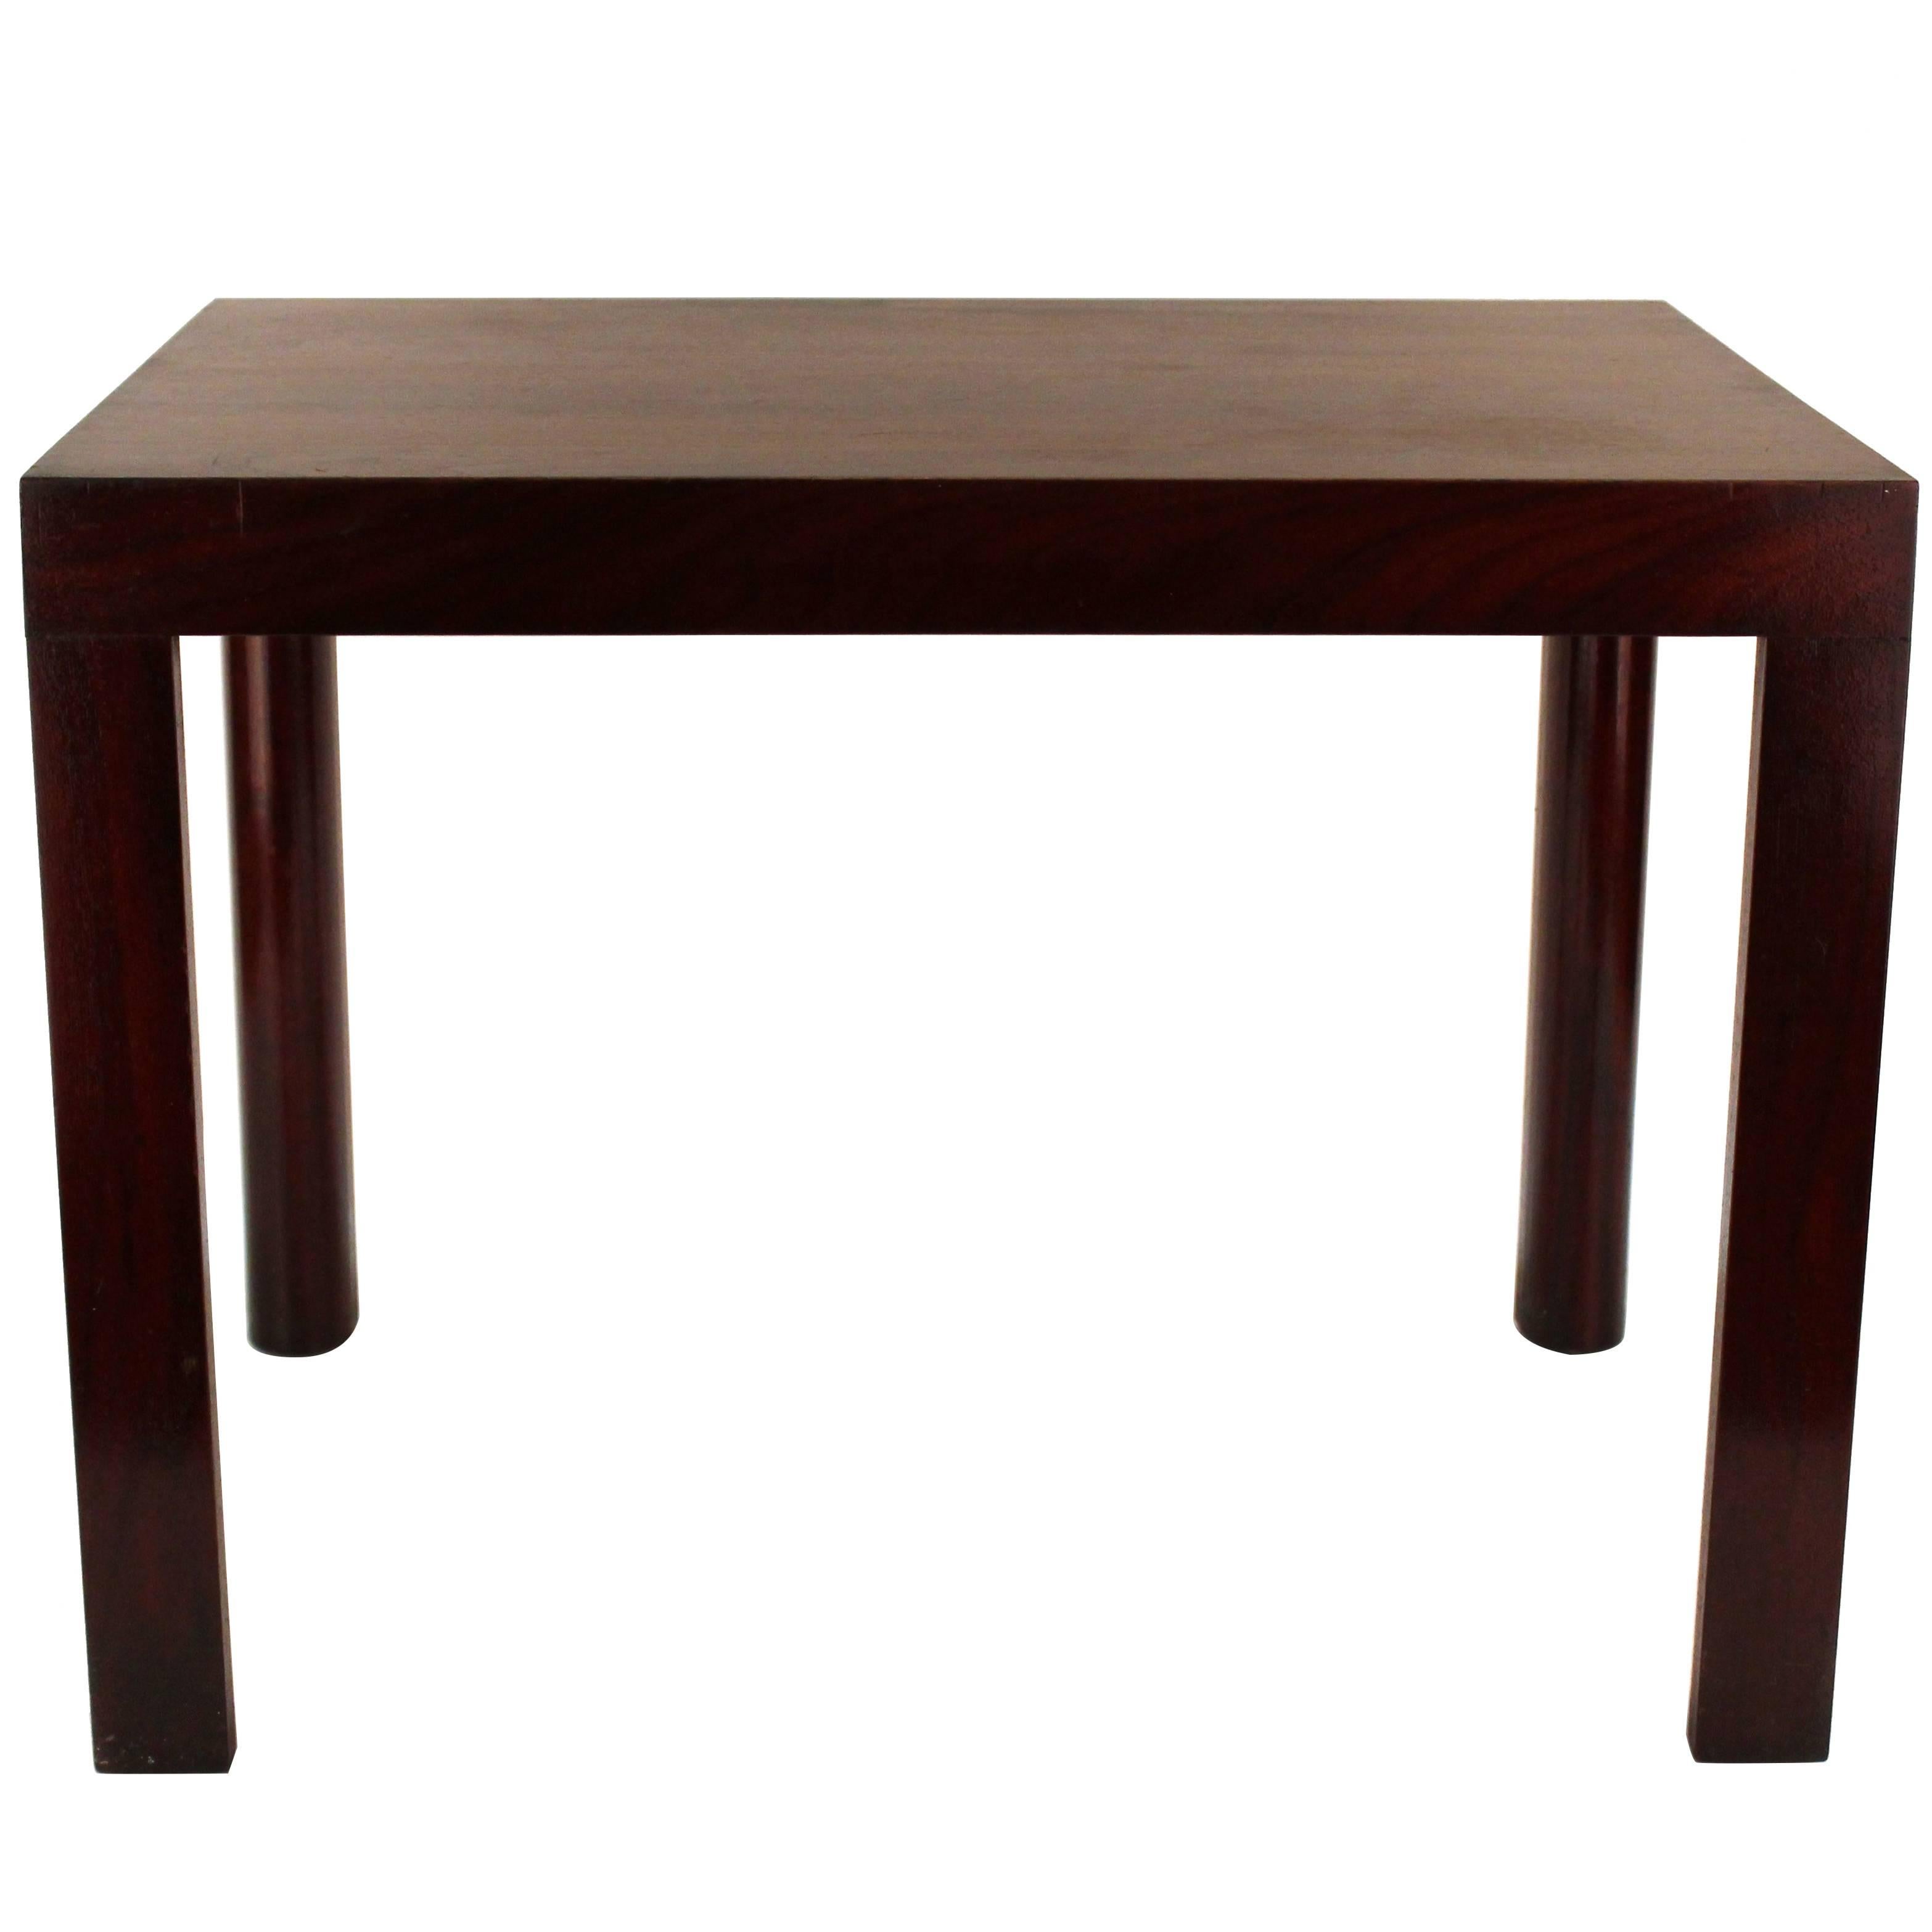 A group of three Enfield side tables. Wood with dark cherry varnish. Features simple rectangular shaped face and straight legs. Wear consistent with use. The set is in good condition.